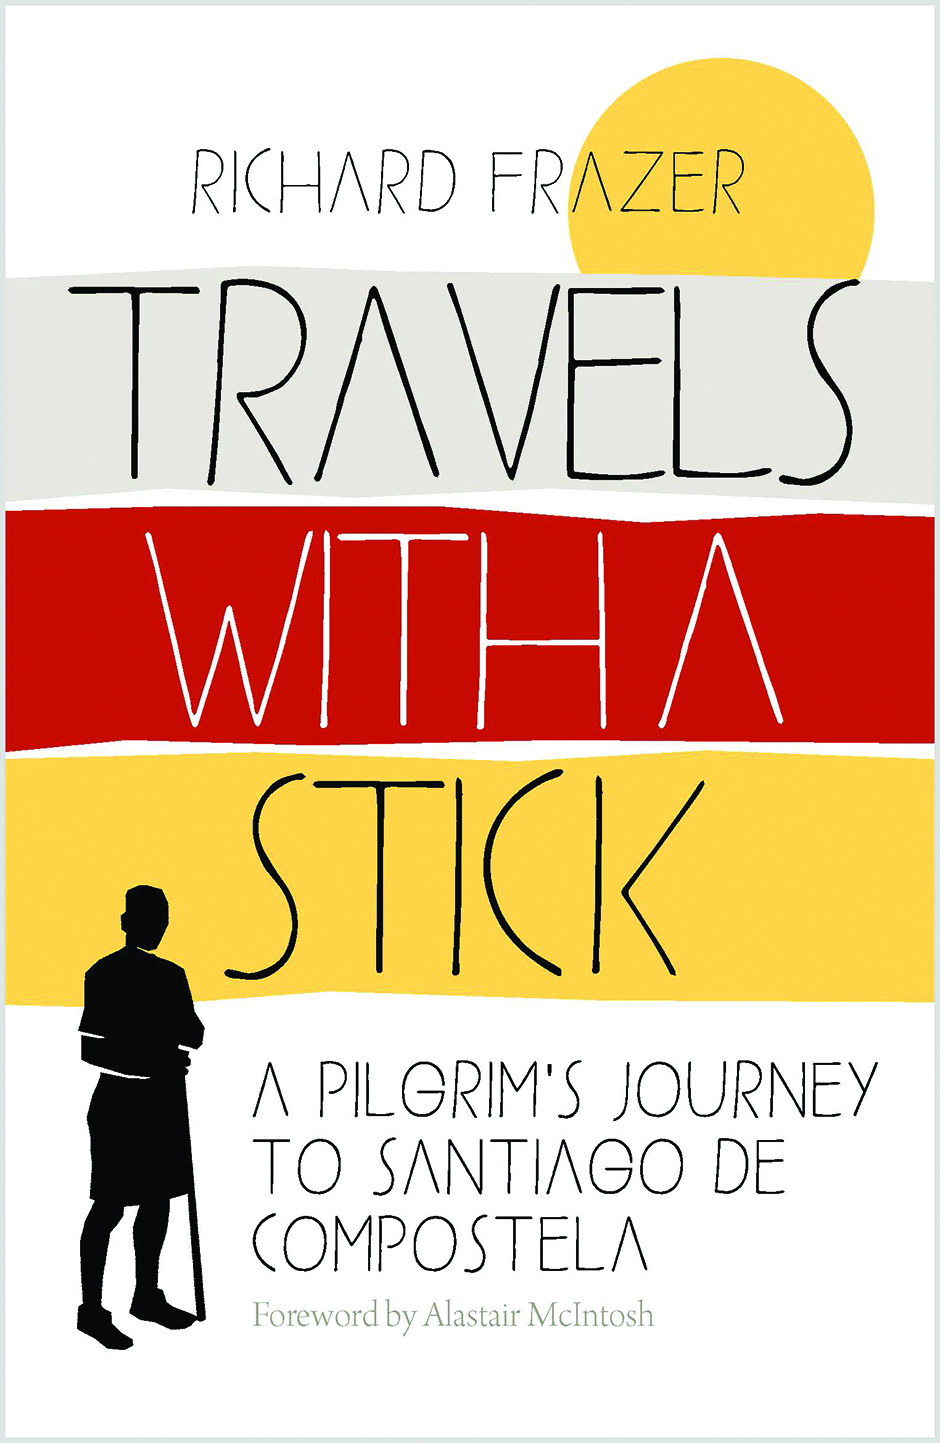 A picture of the front cover of Richard's book - Travels with a Stick